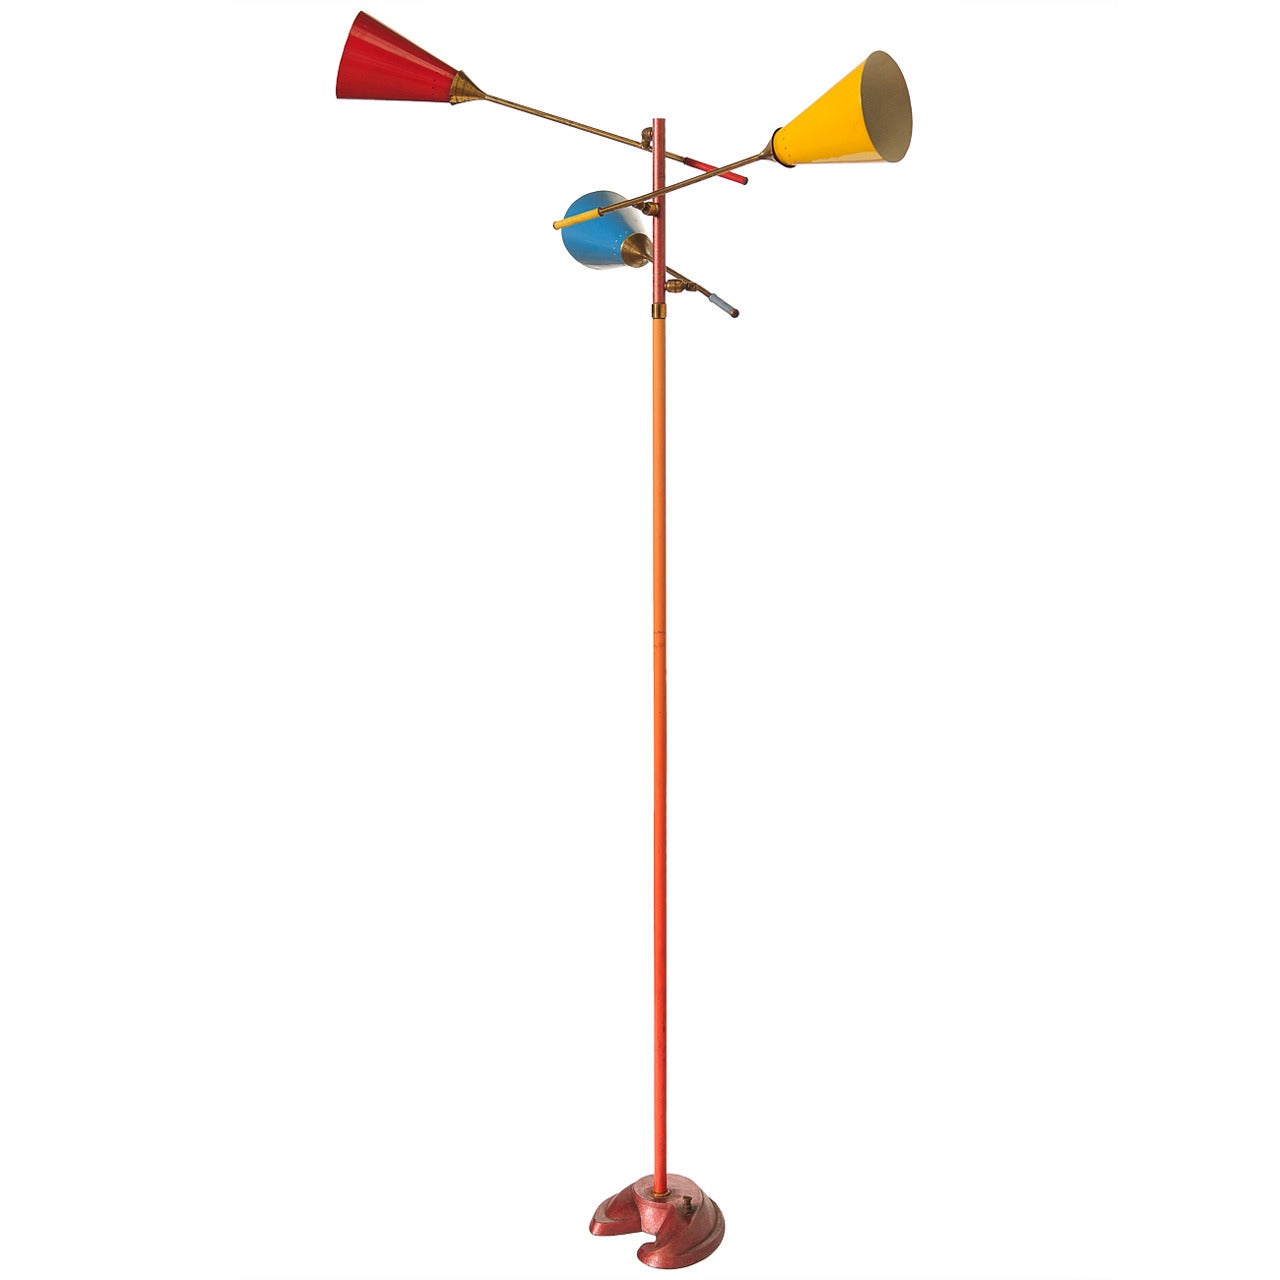 Stunning floor lamp by Gino Sarfatti, published in Wright Auction catalogue